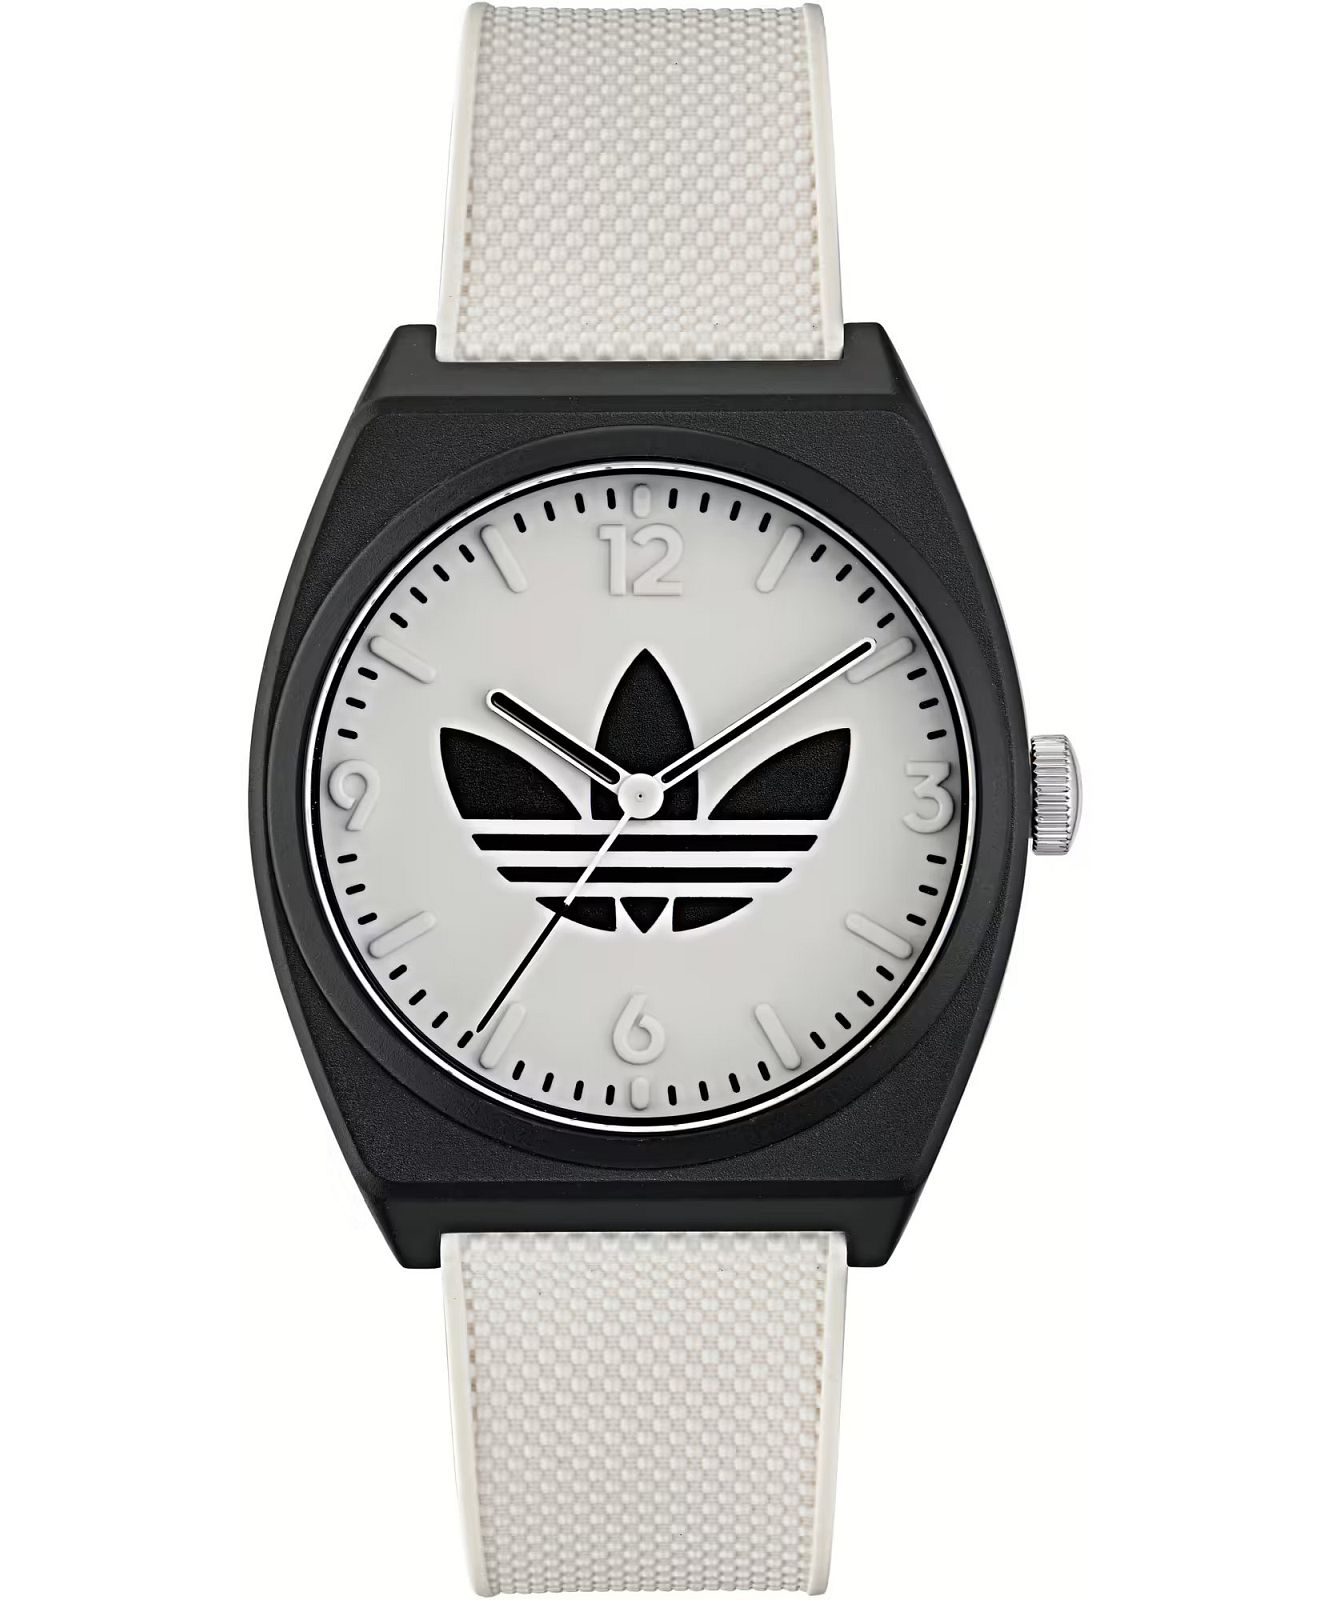 AOST23549 Project • Watch Originals Adidas - Two